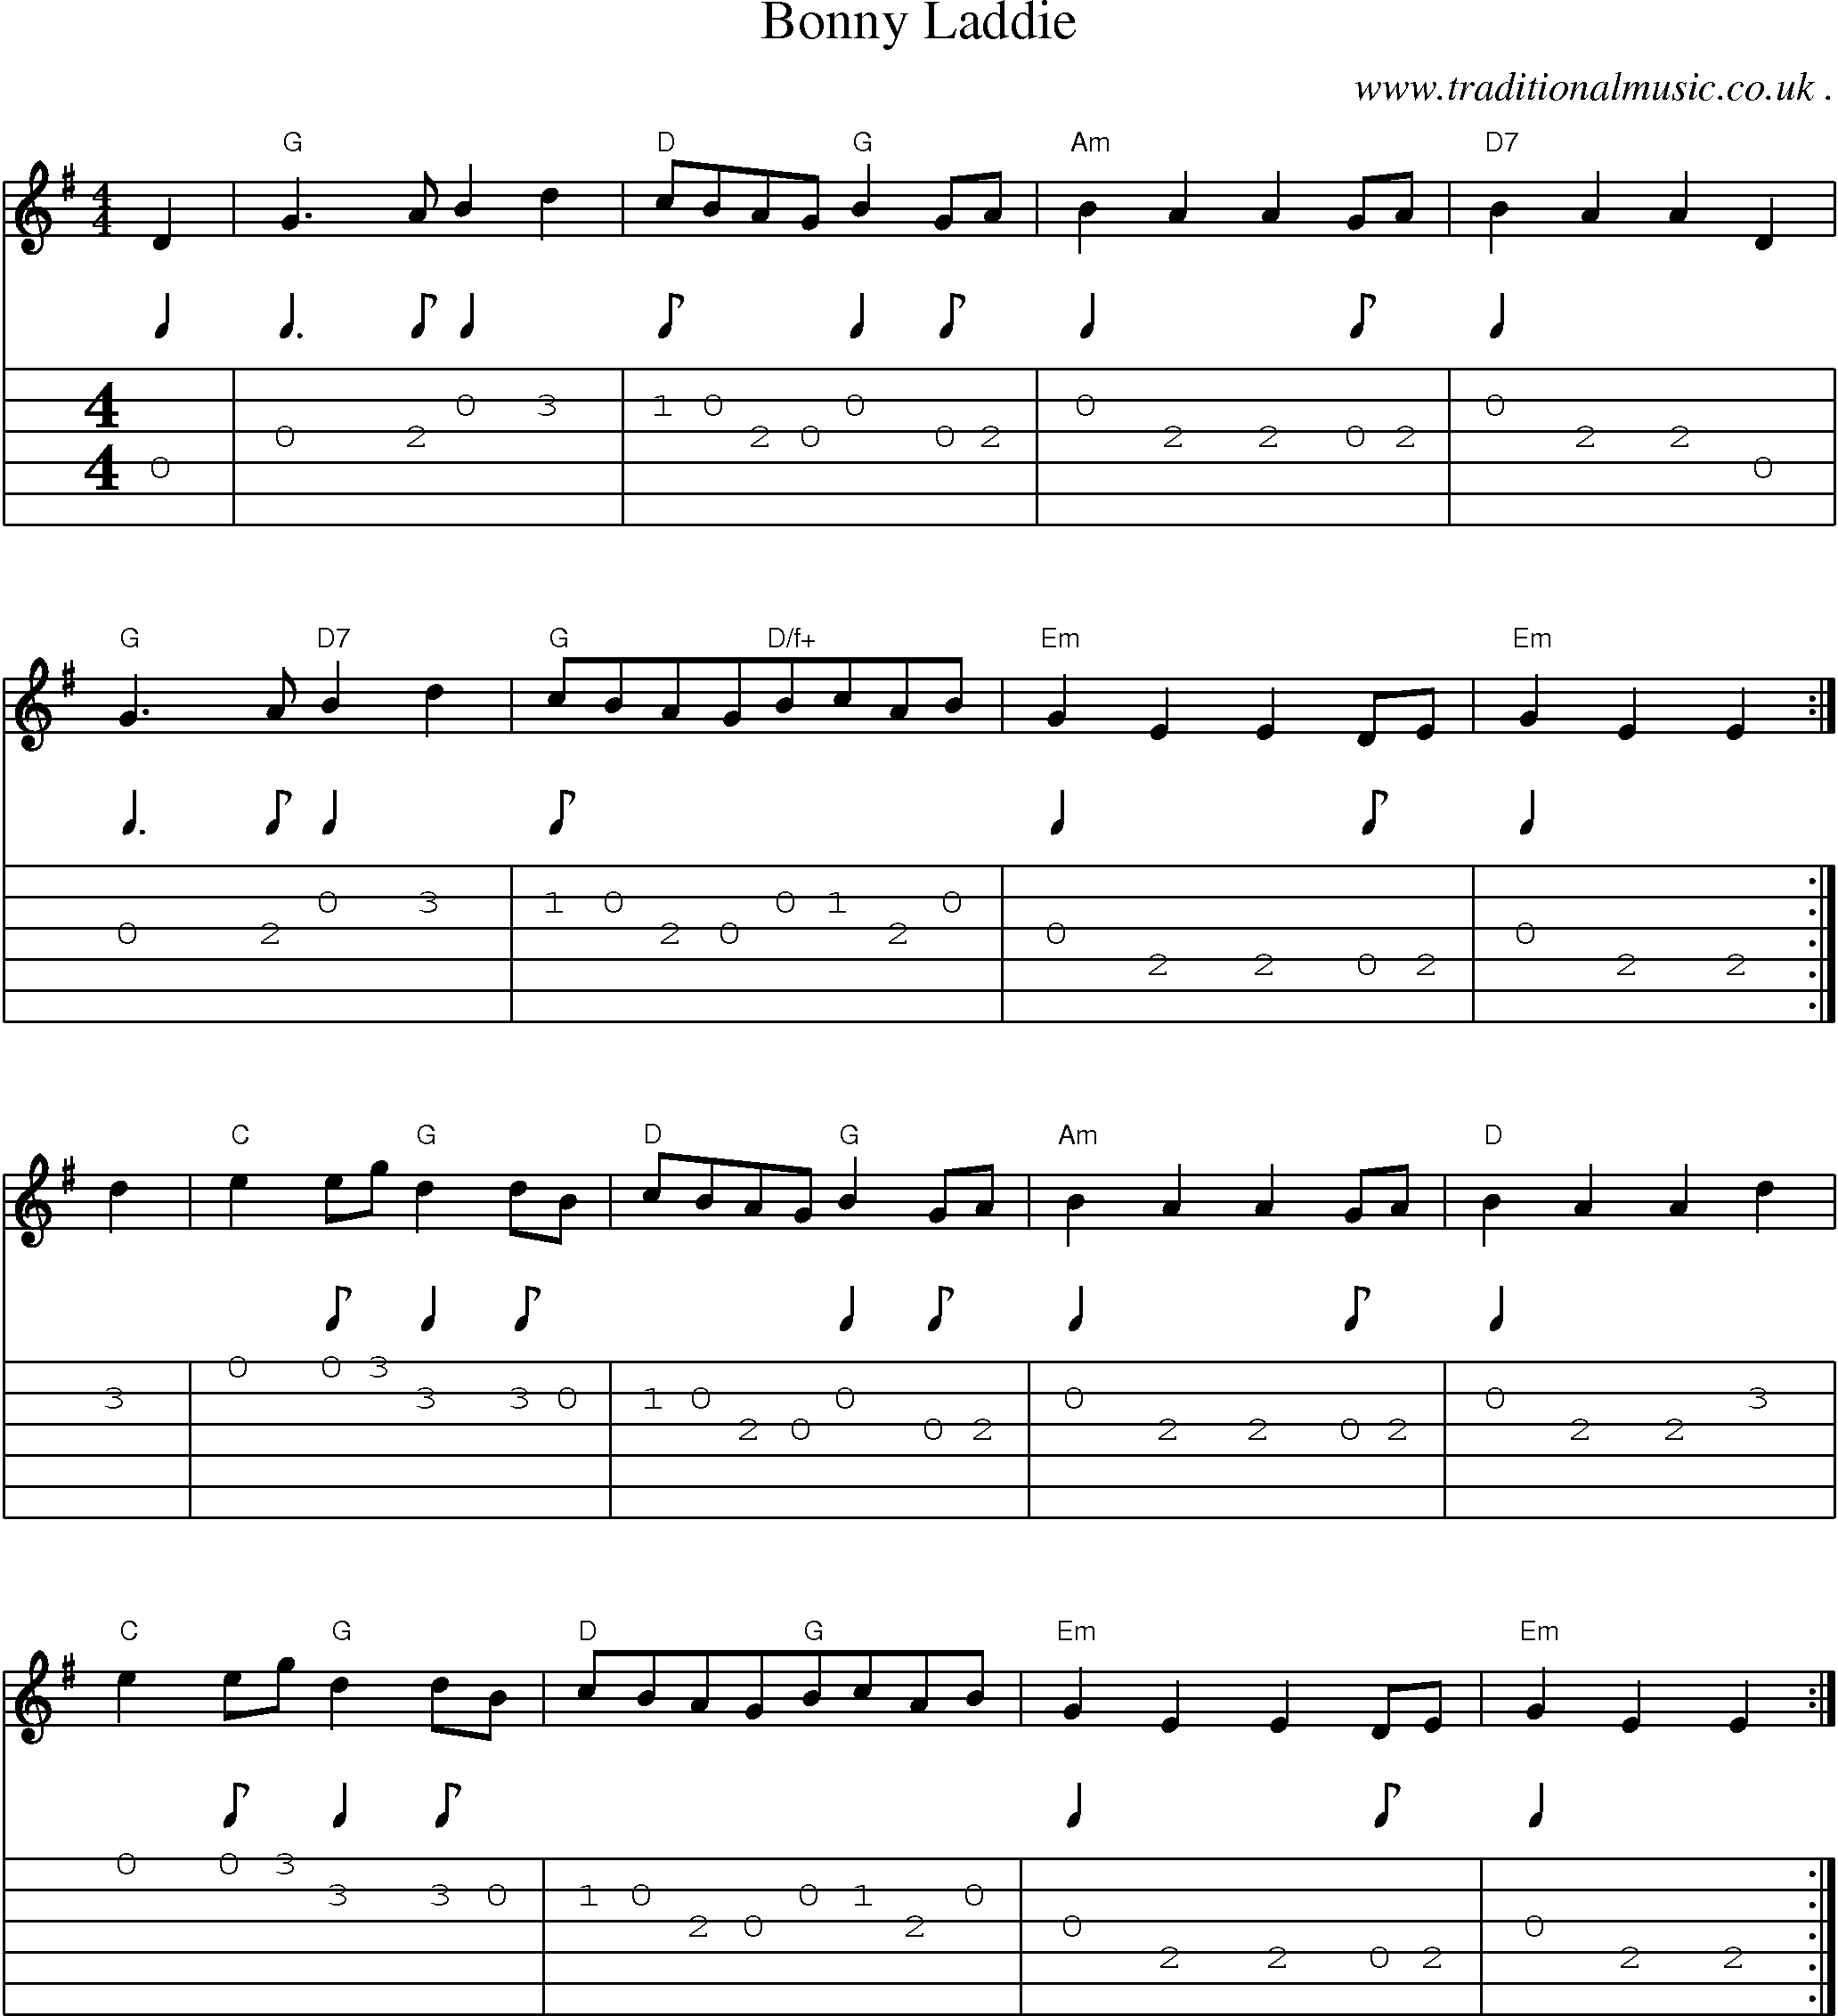 Sheet-Music and Guitar Tabs for Bonny Laddie